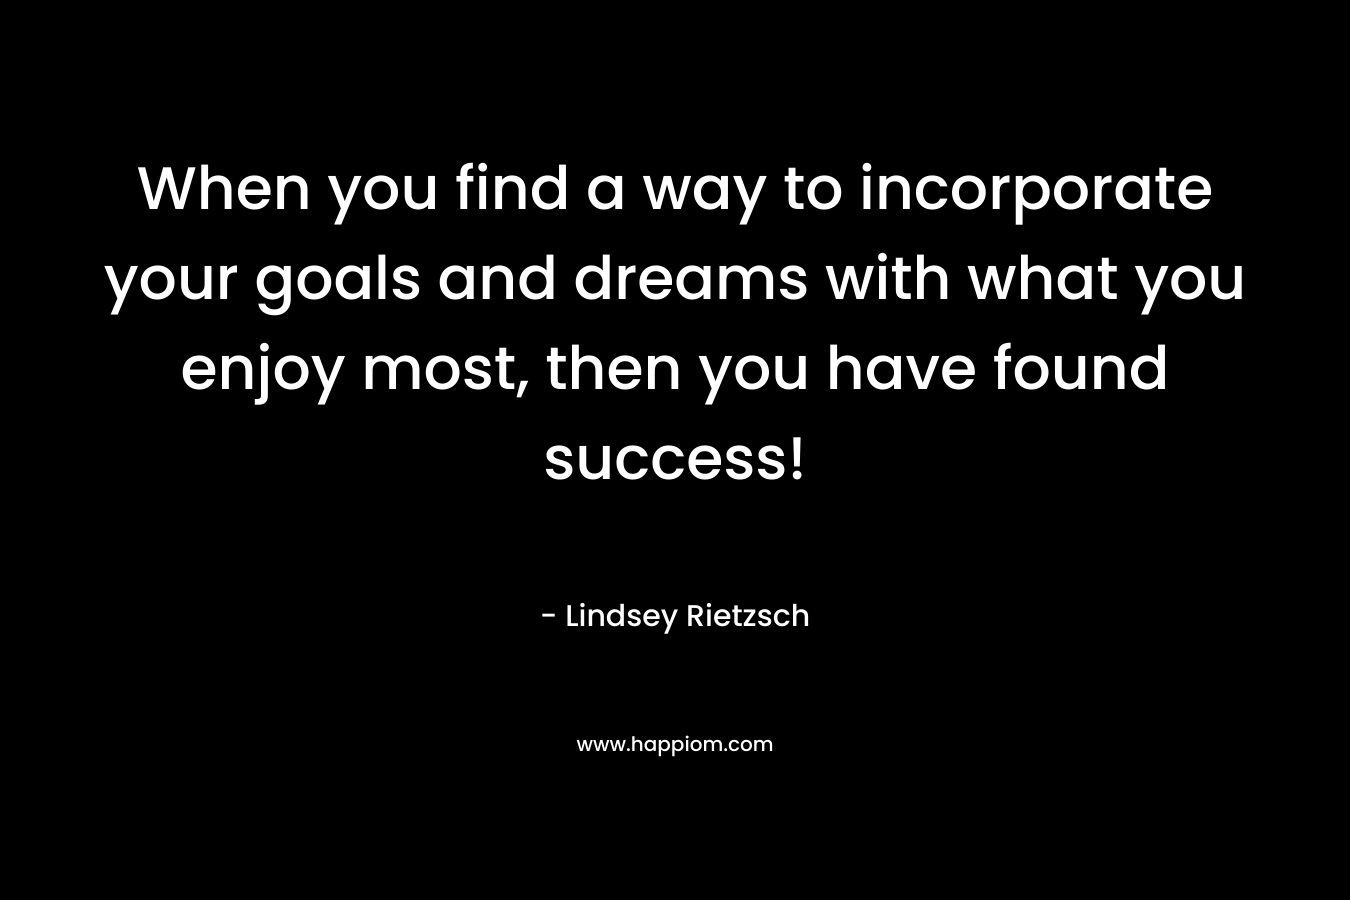 When you find a way to incorporate your goals and dreams with what you enjoy most, then you have found success! – Lindsey Rietzsch